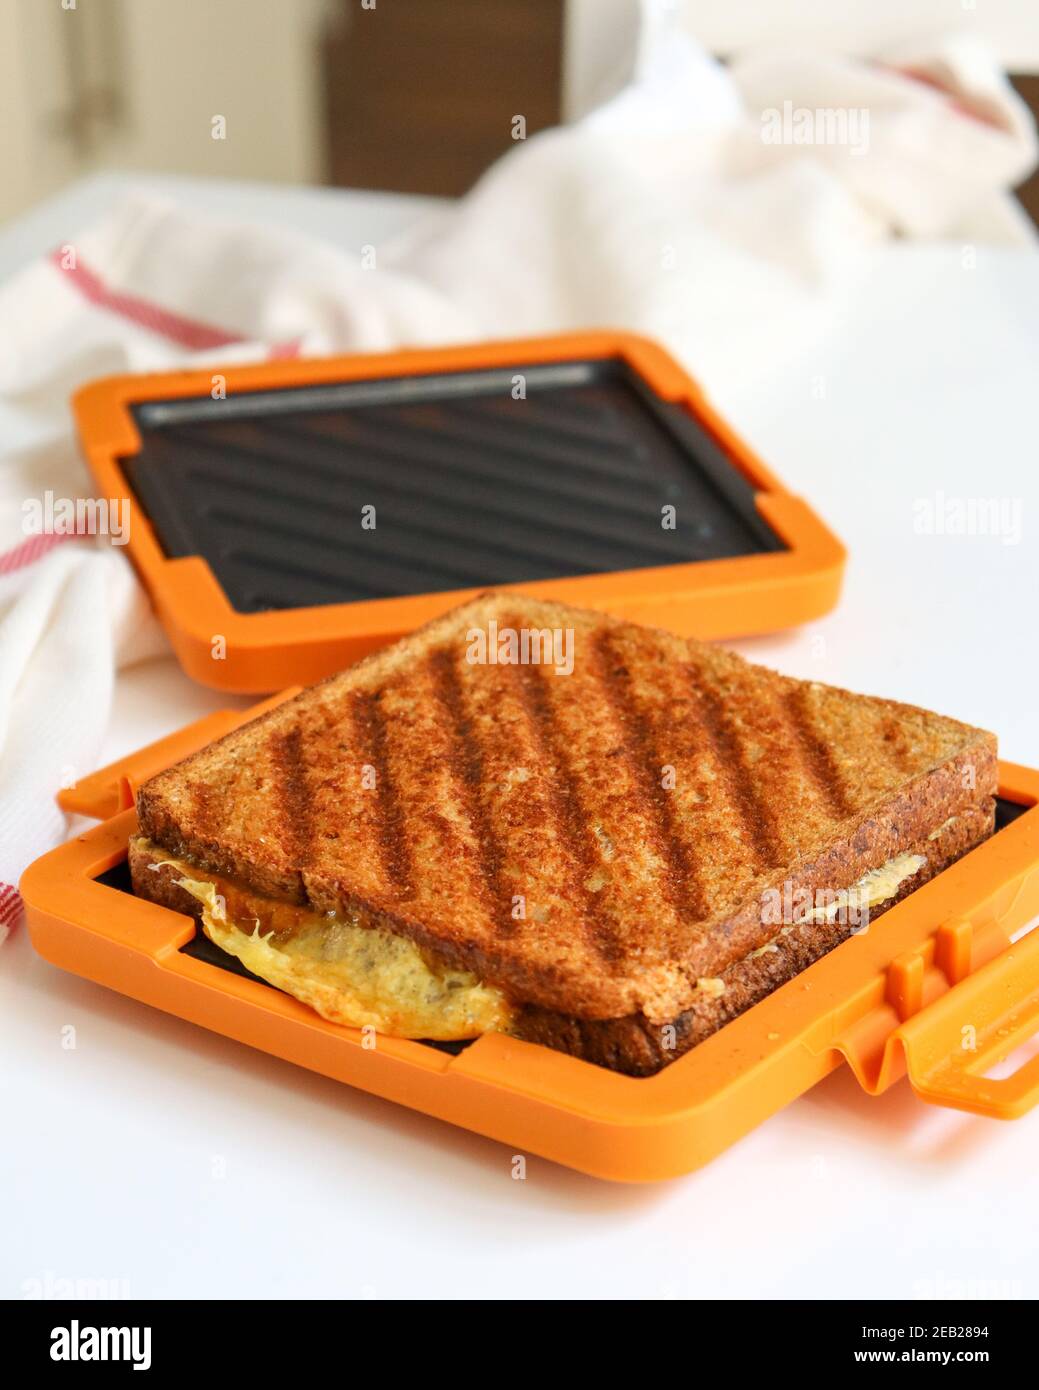 https://c8.alamy.com/comp/2EB2894/morphy-richards-mico-toastie-toasted-sandwiches-microwave-cookware-kitchen-food-preparation-cooking-snack-grilled-sandwich-ve-2EB2894.jpg